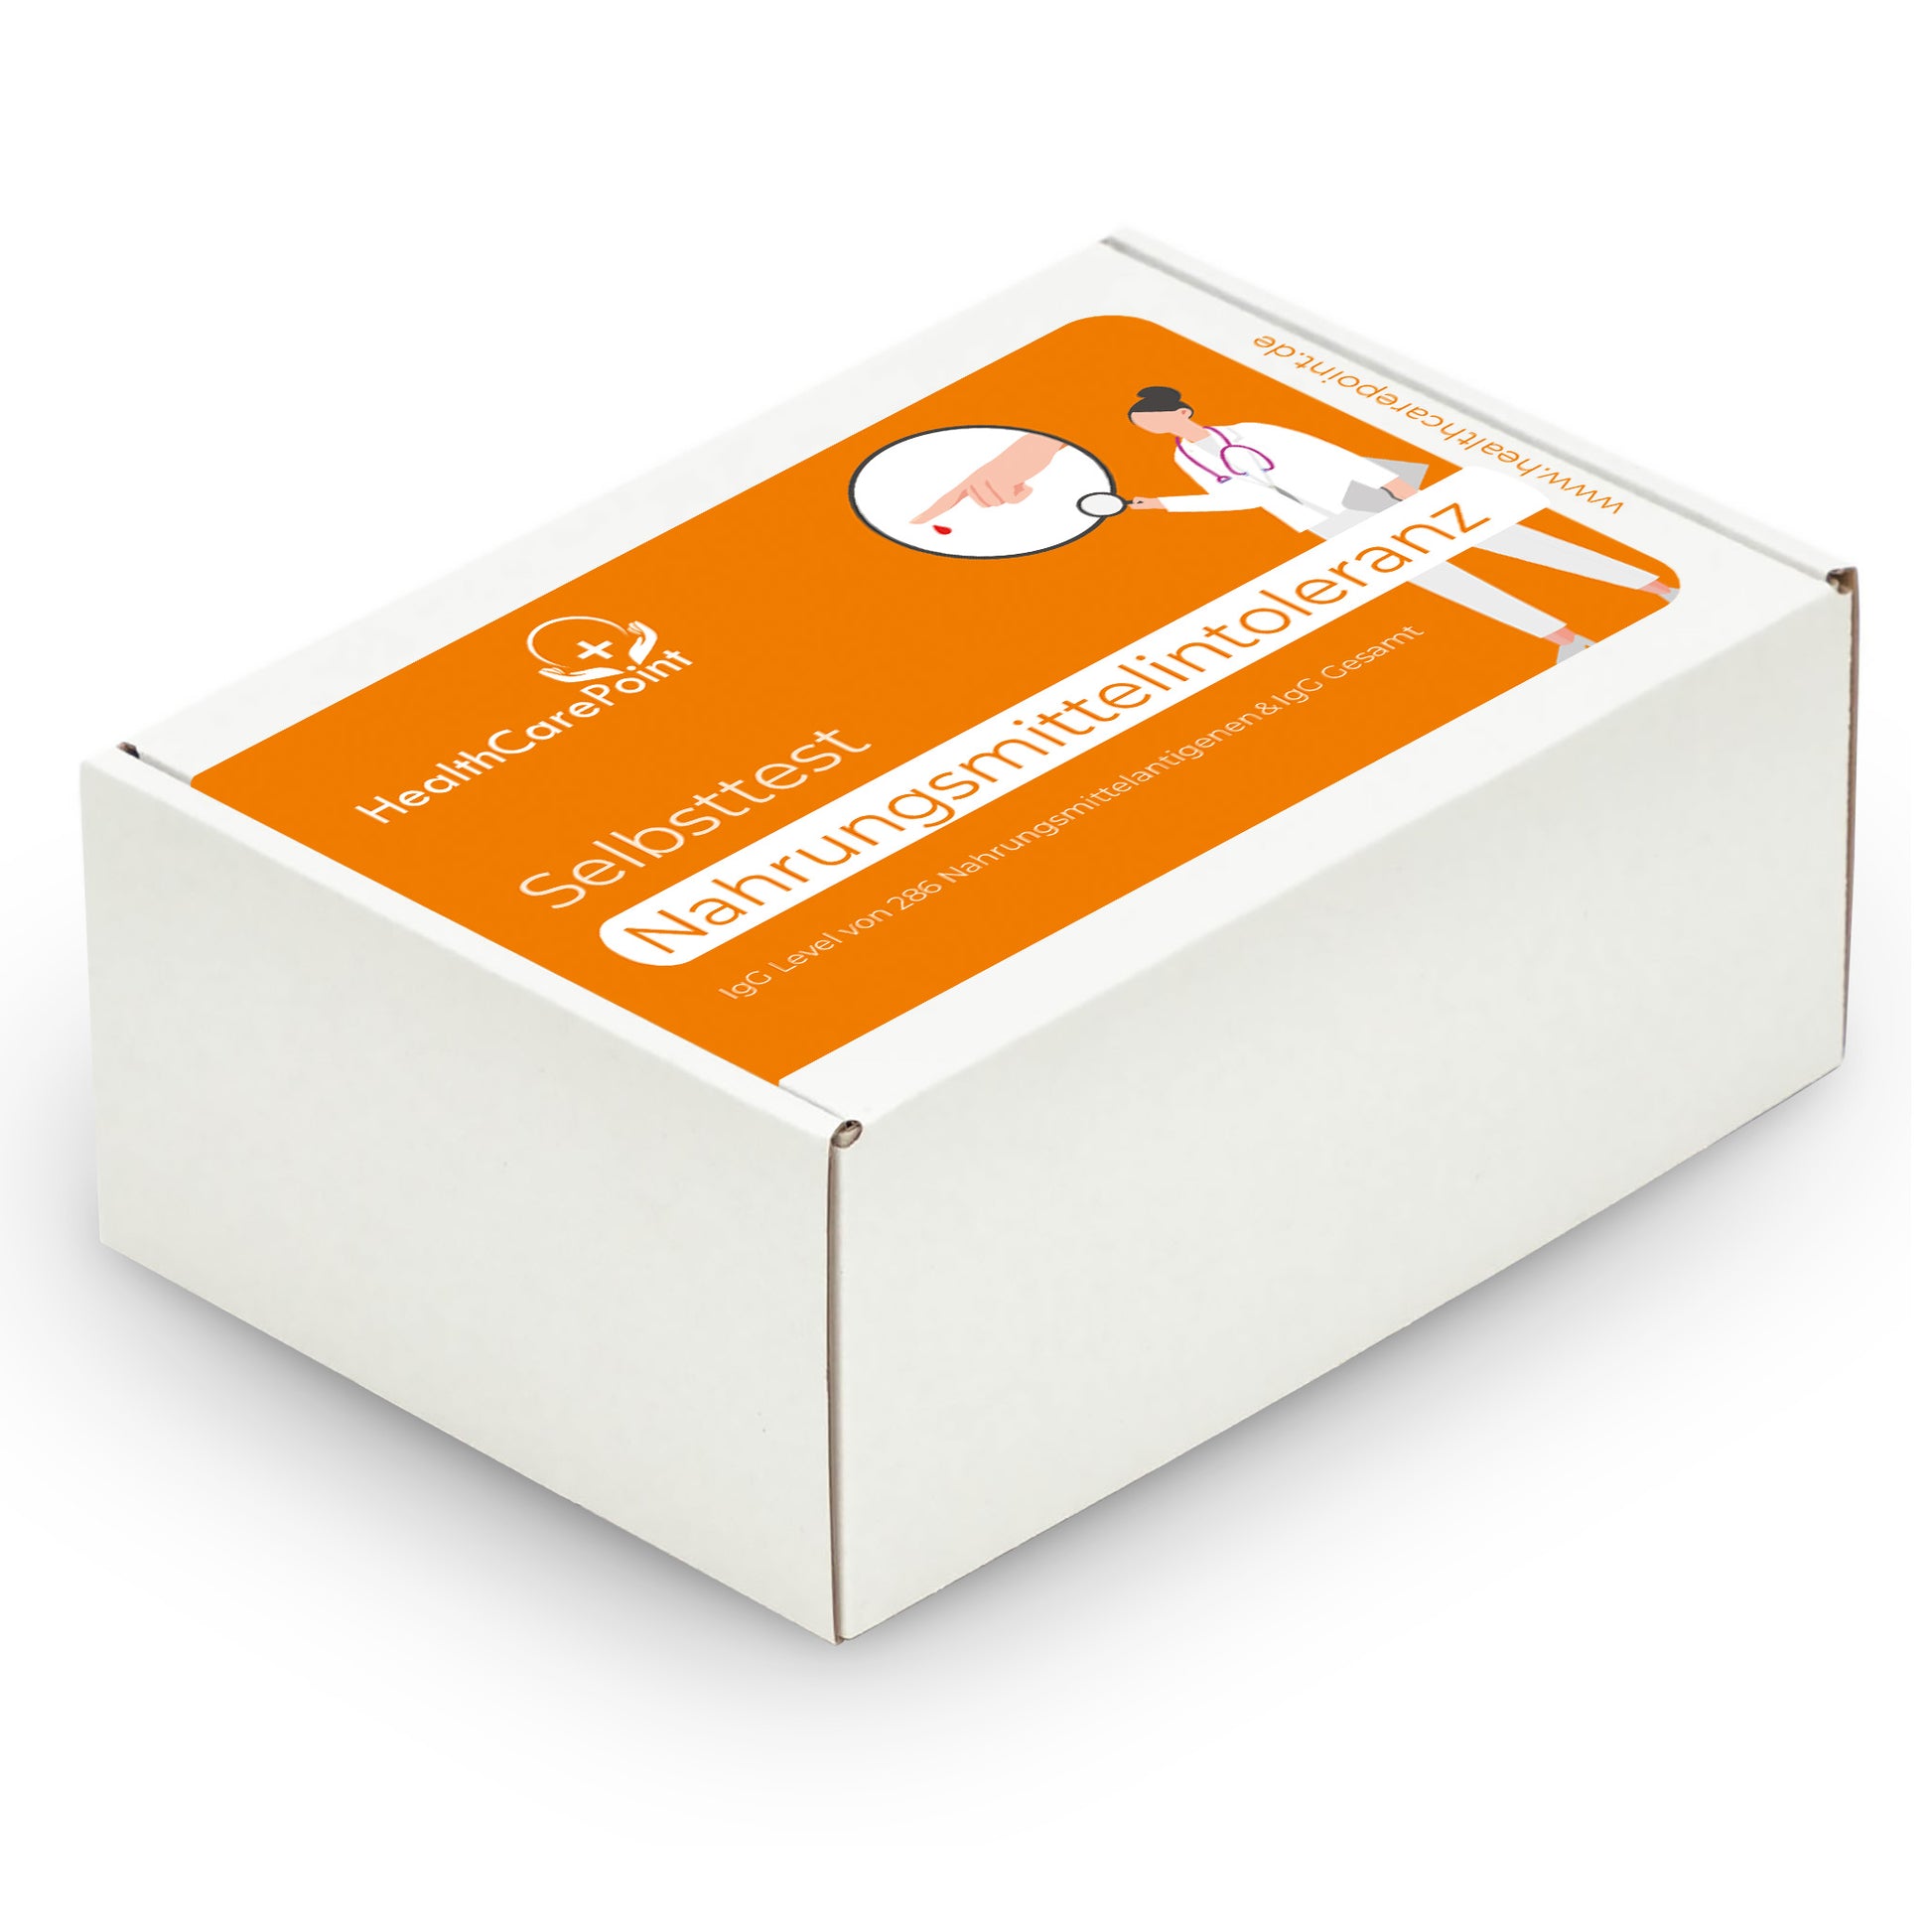 a white box with a orange label on it